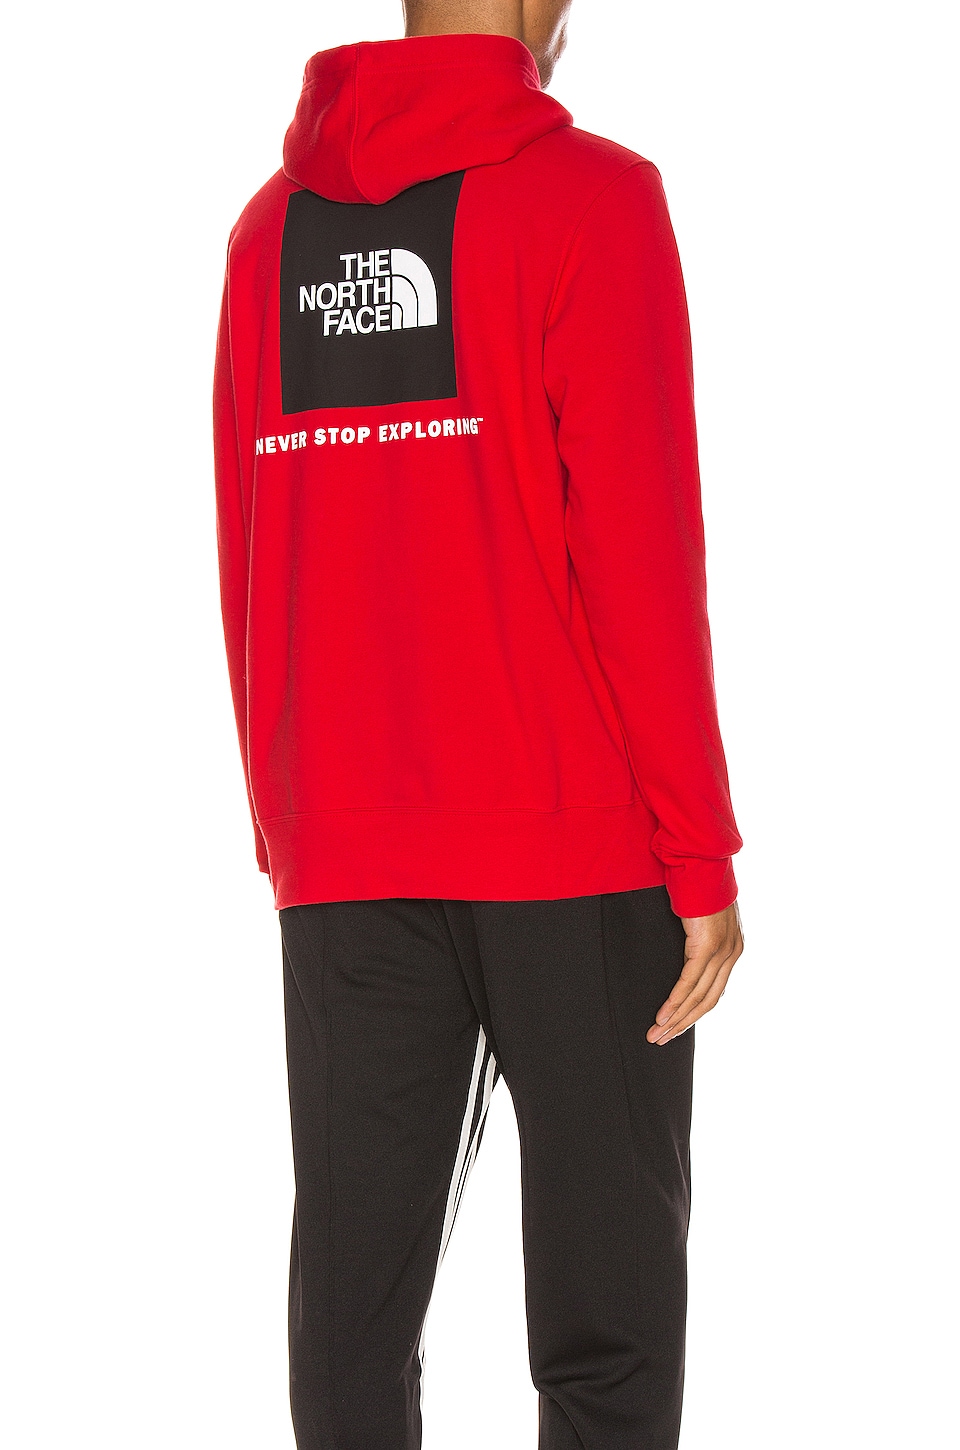 the north face never stop exploring sweatshirt